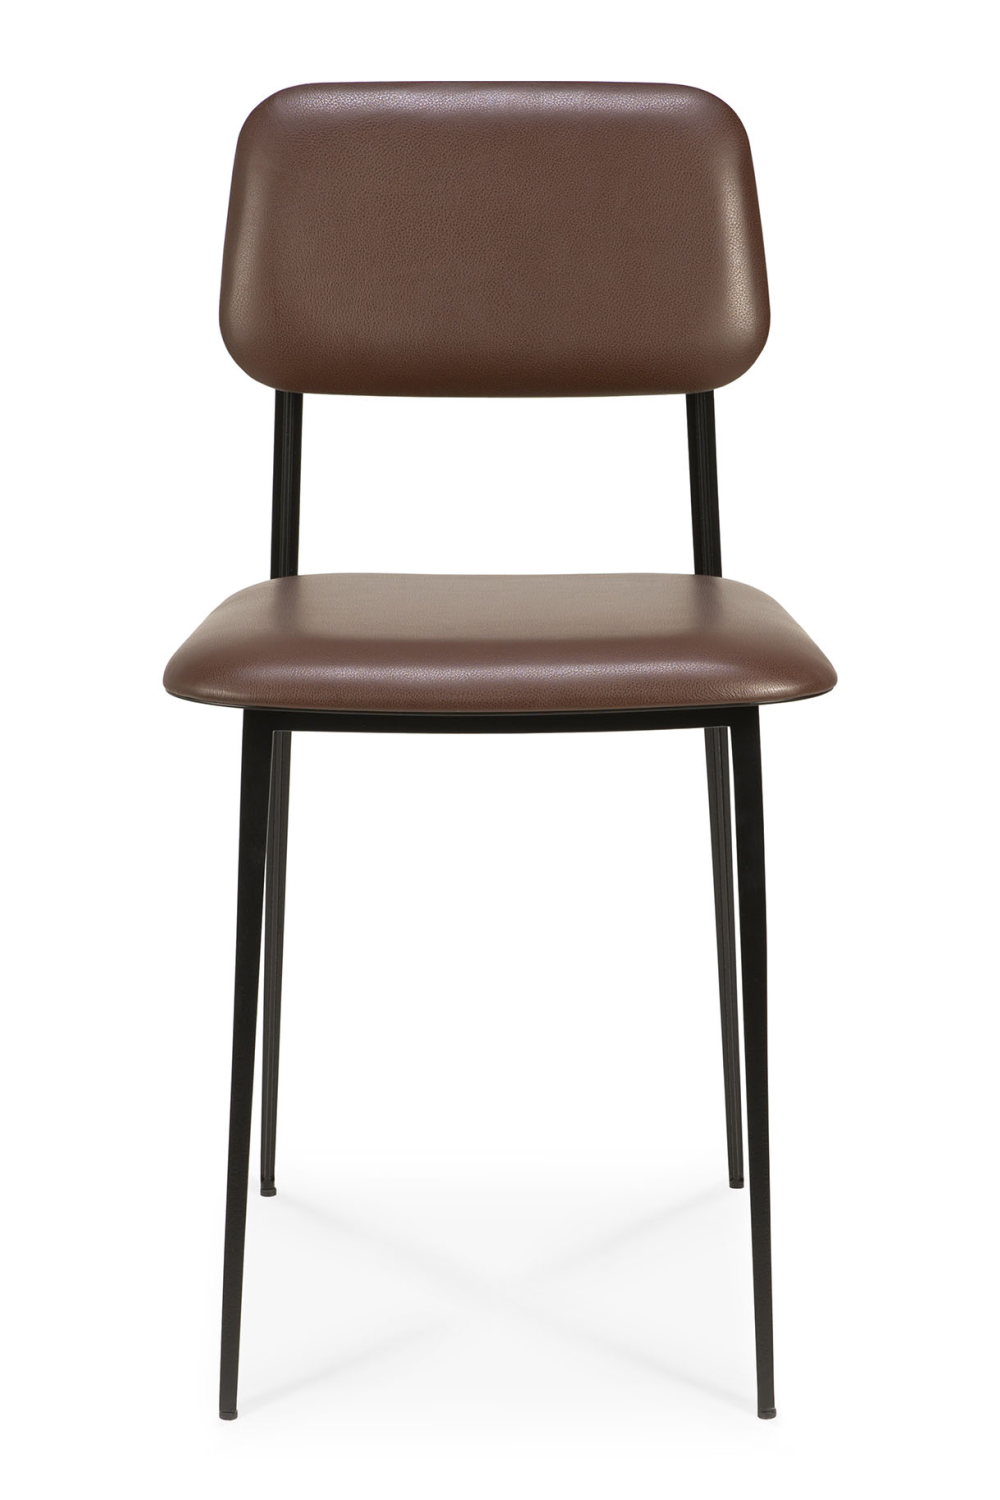 Image of Industrial Dining Chair | Ethnicraft DC